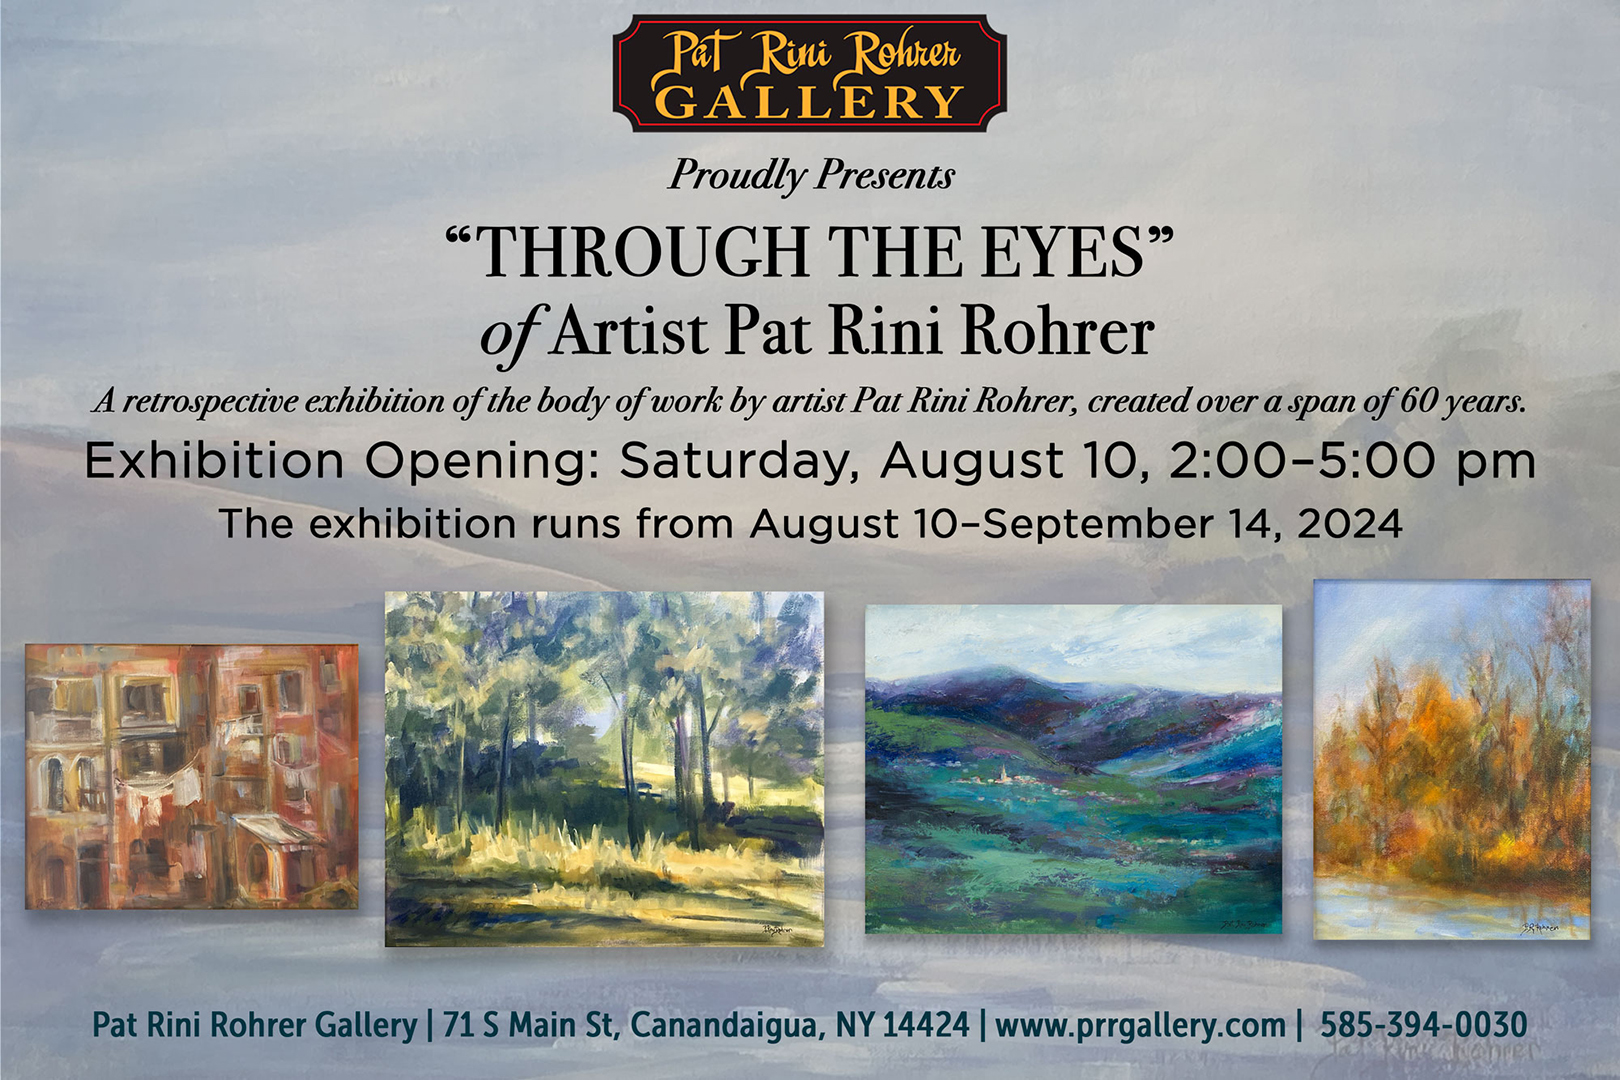 “Through The Eyes” of Artist Pat Rini Rohrer exhibition at the Pat Rini Rohrer Gallery